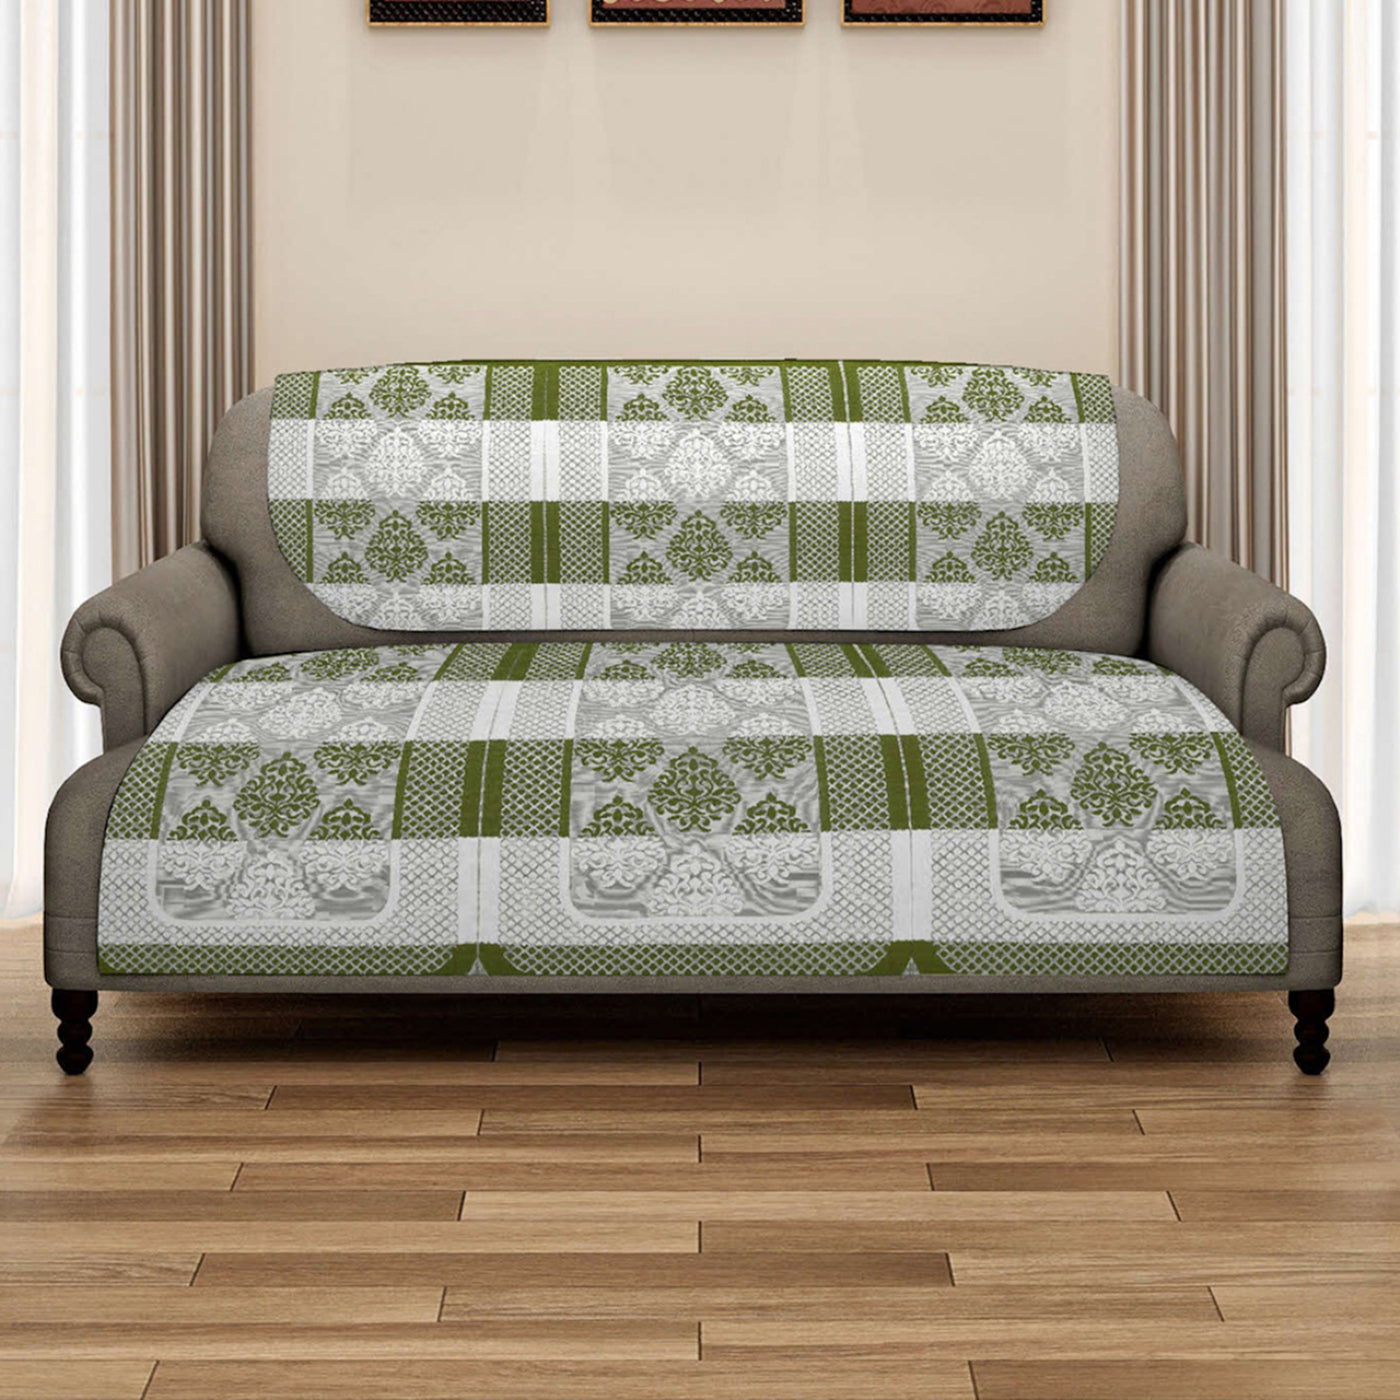 Romee 6-pieces green & cream damask patterned 5-seater sofa covers slpss81